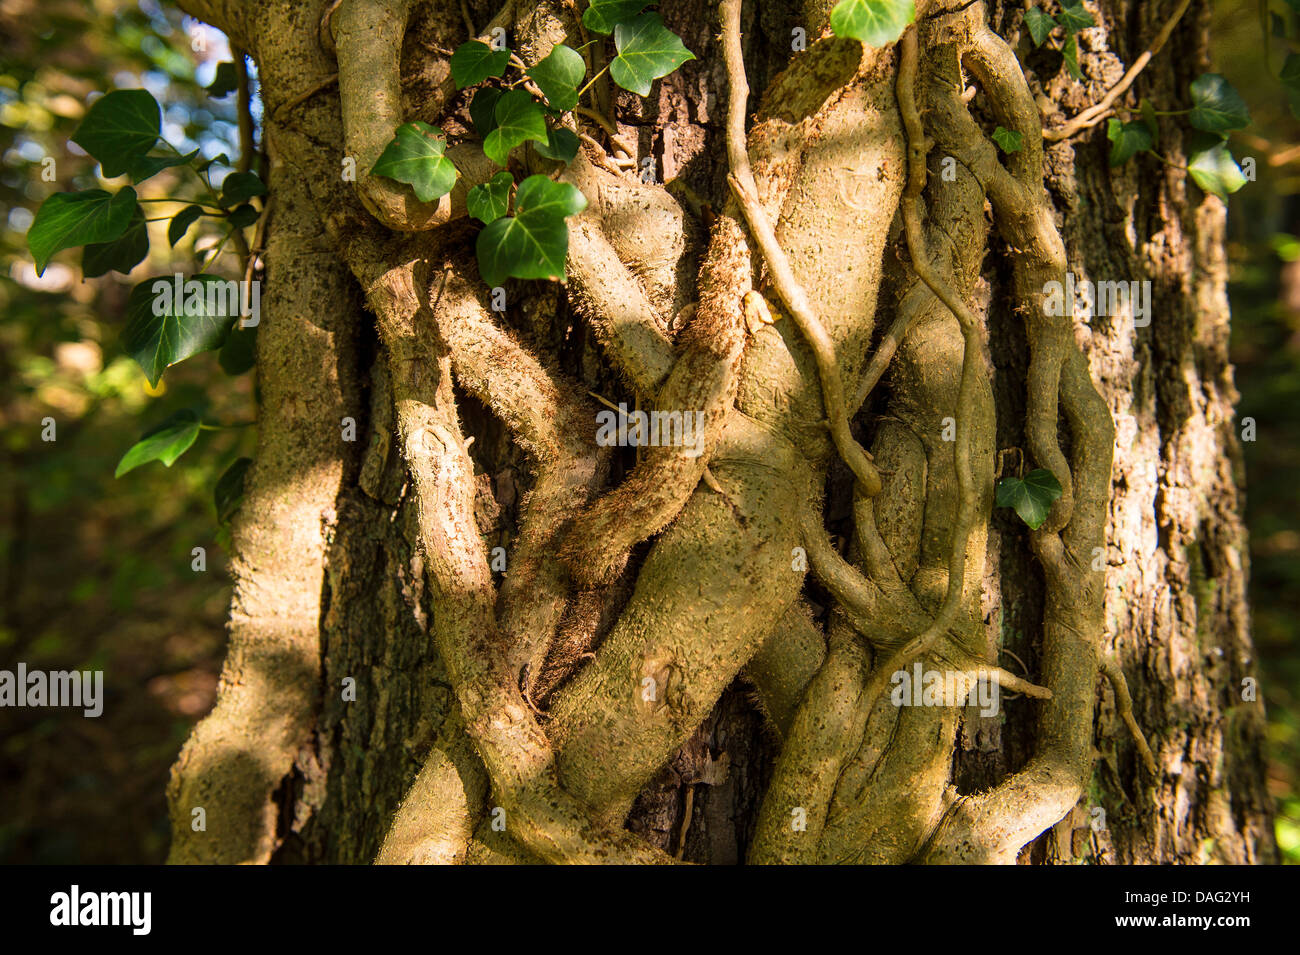 English ivy, common ivy (Hedera helix), thick stems at an tree trunk, Germany, North Rhine-Westphalia Stock Photo